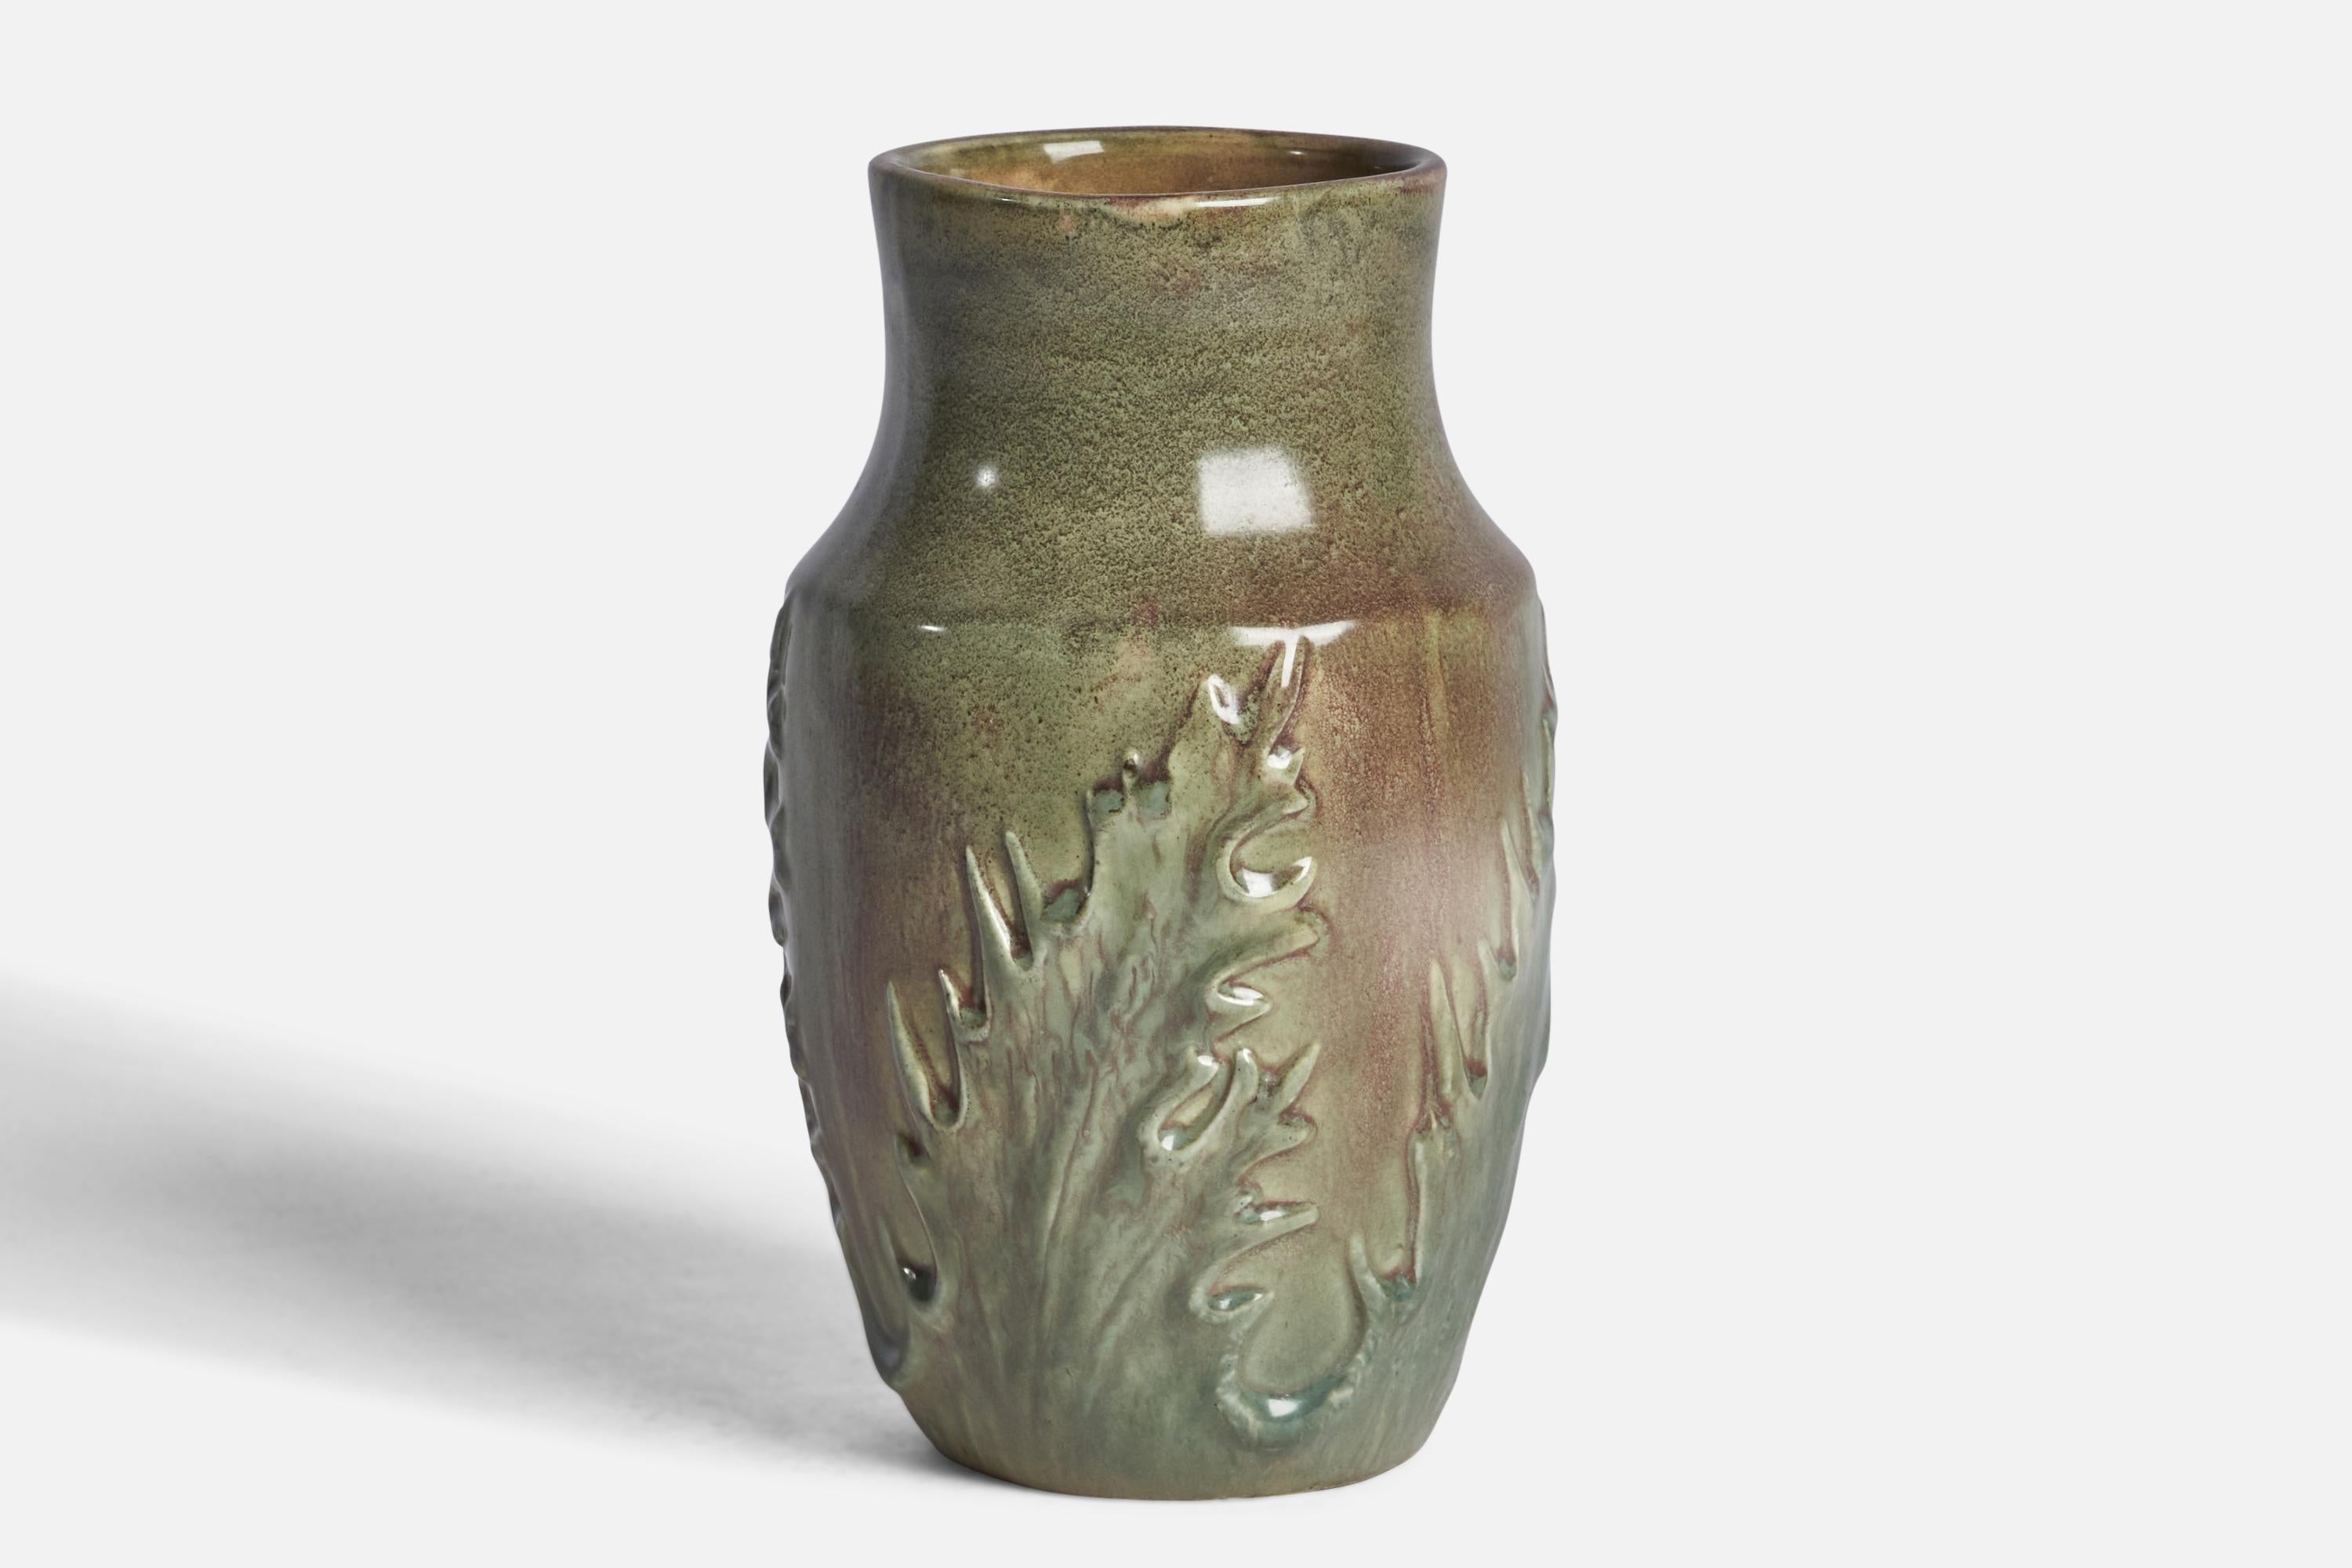 A green and brown-glazed stoneware vase designed and produced by Höganäs, Sweden, c. 1920s.